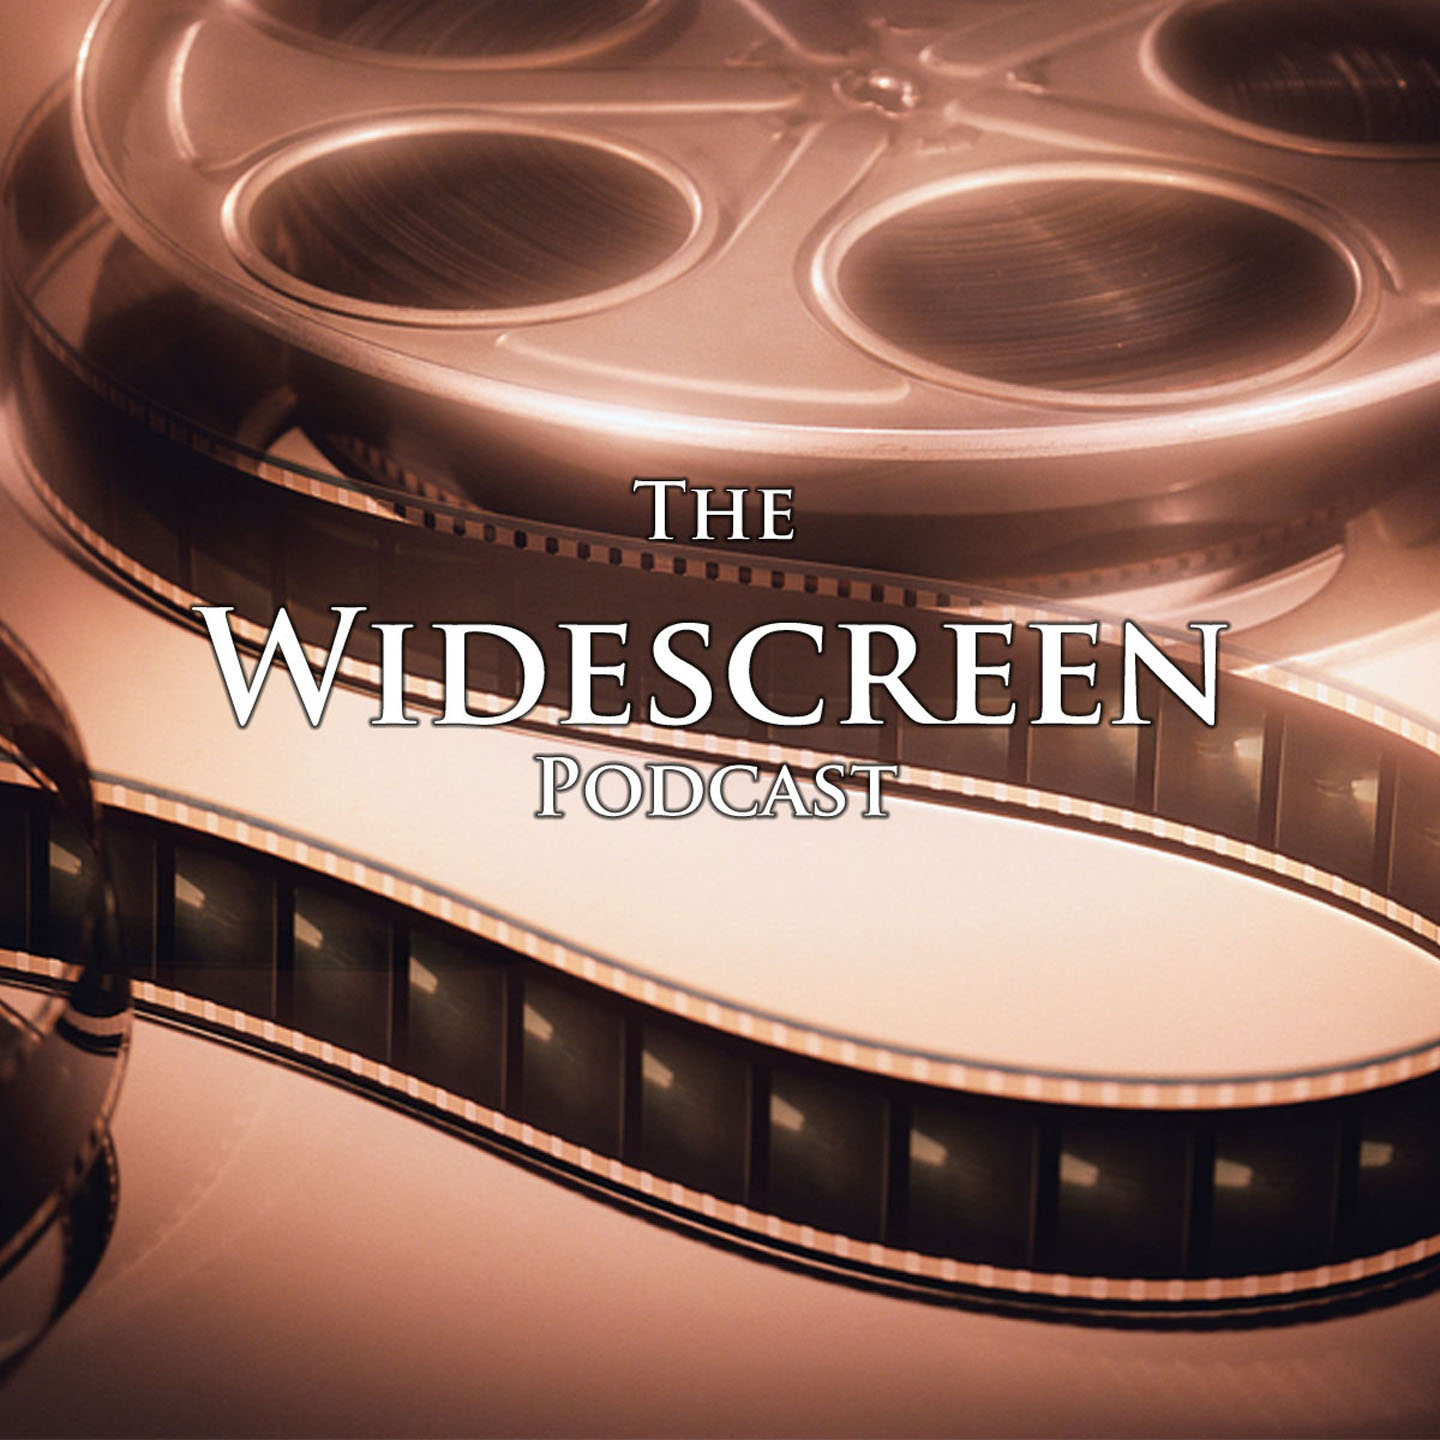 The Widescreen Podcast